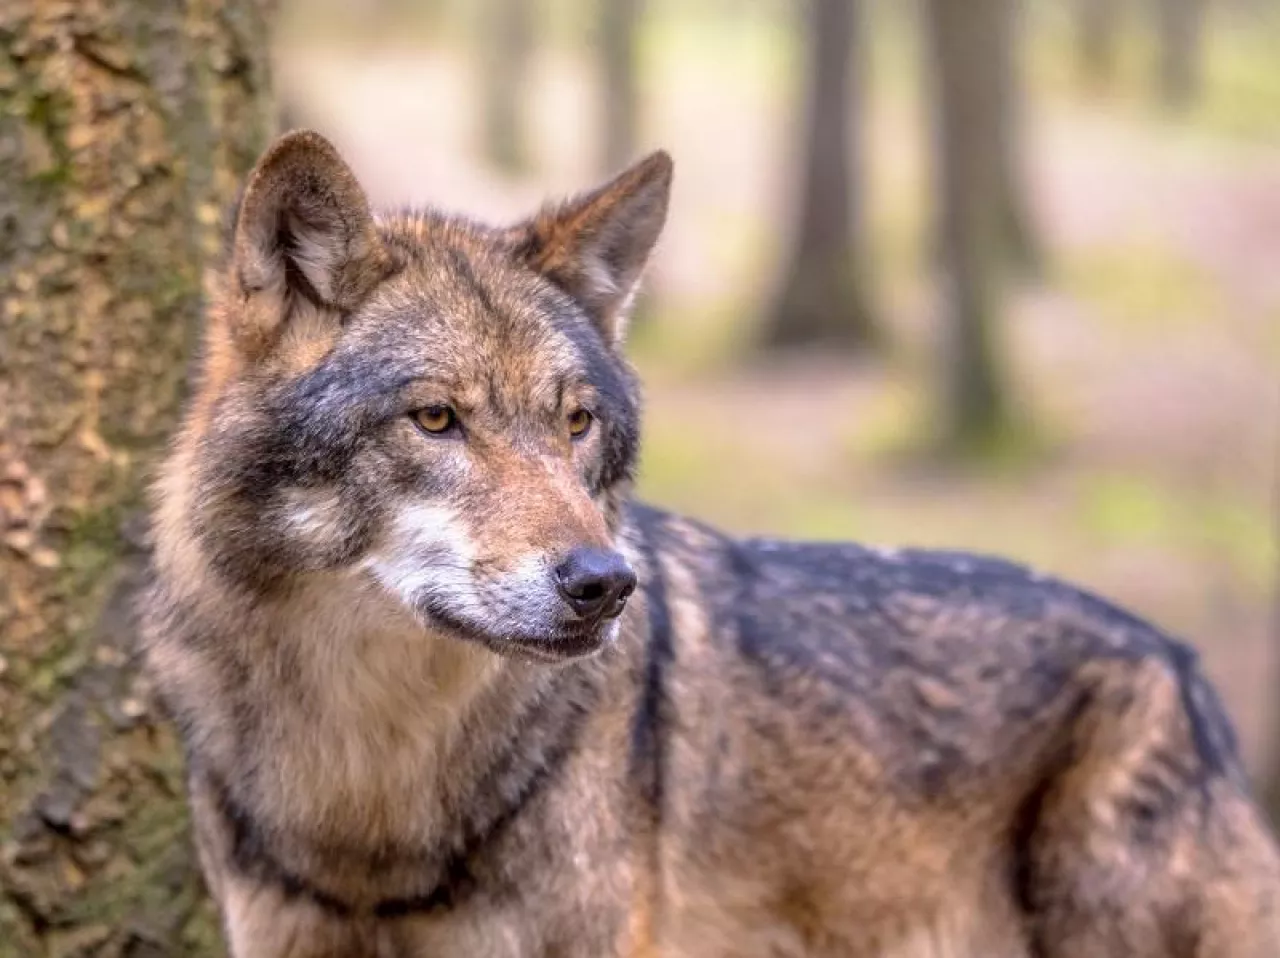 &lt;p&gt;European Wolf (Canis lupus) sideview in natural tree forest habitat looking to side&lt;/p&gt;